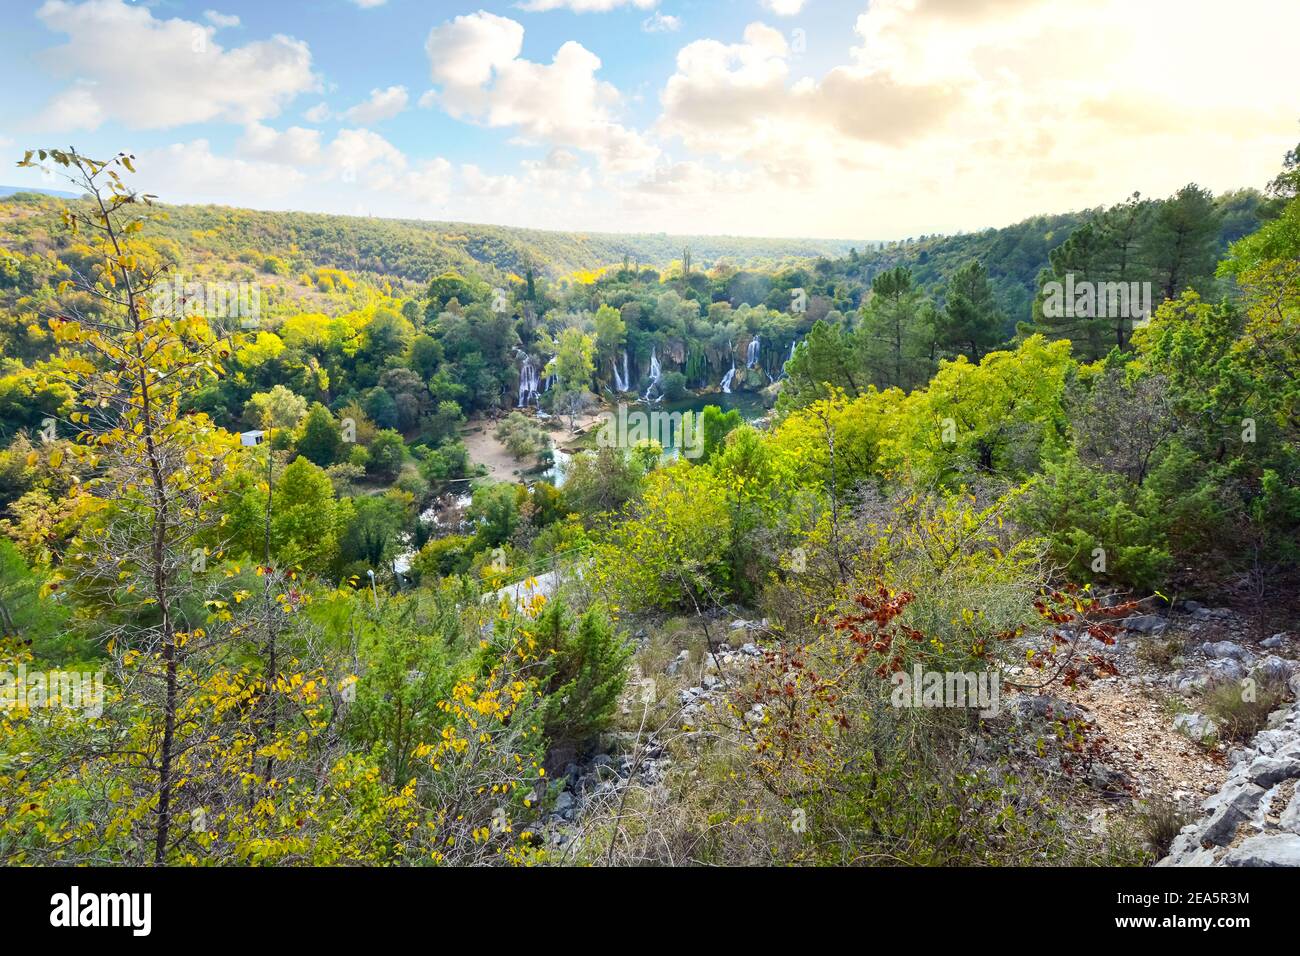 View from a hill looking down over the Kravica Waterfalls on the Trebizat River in the Karstic heartland of Bosnia and Herzegovina. Stock Photo